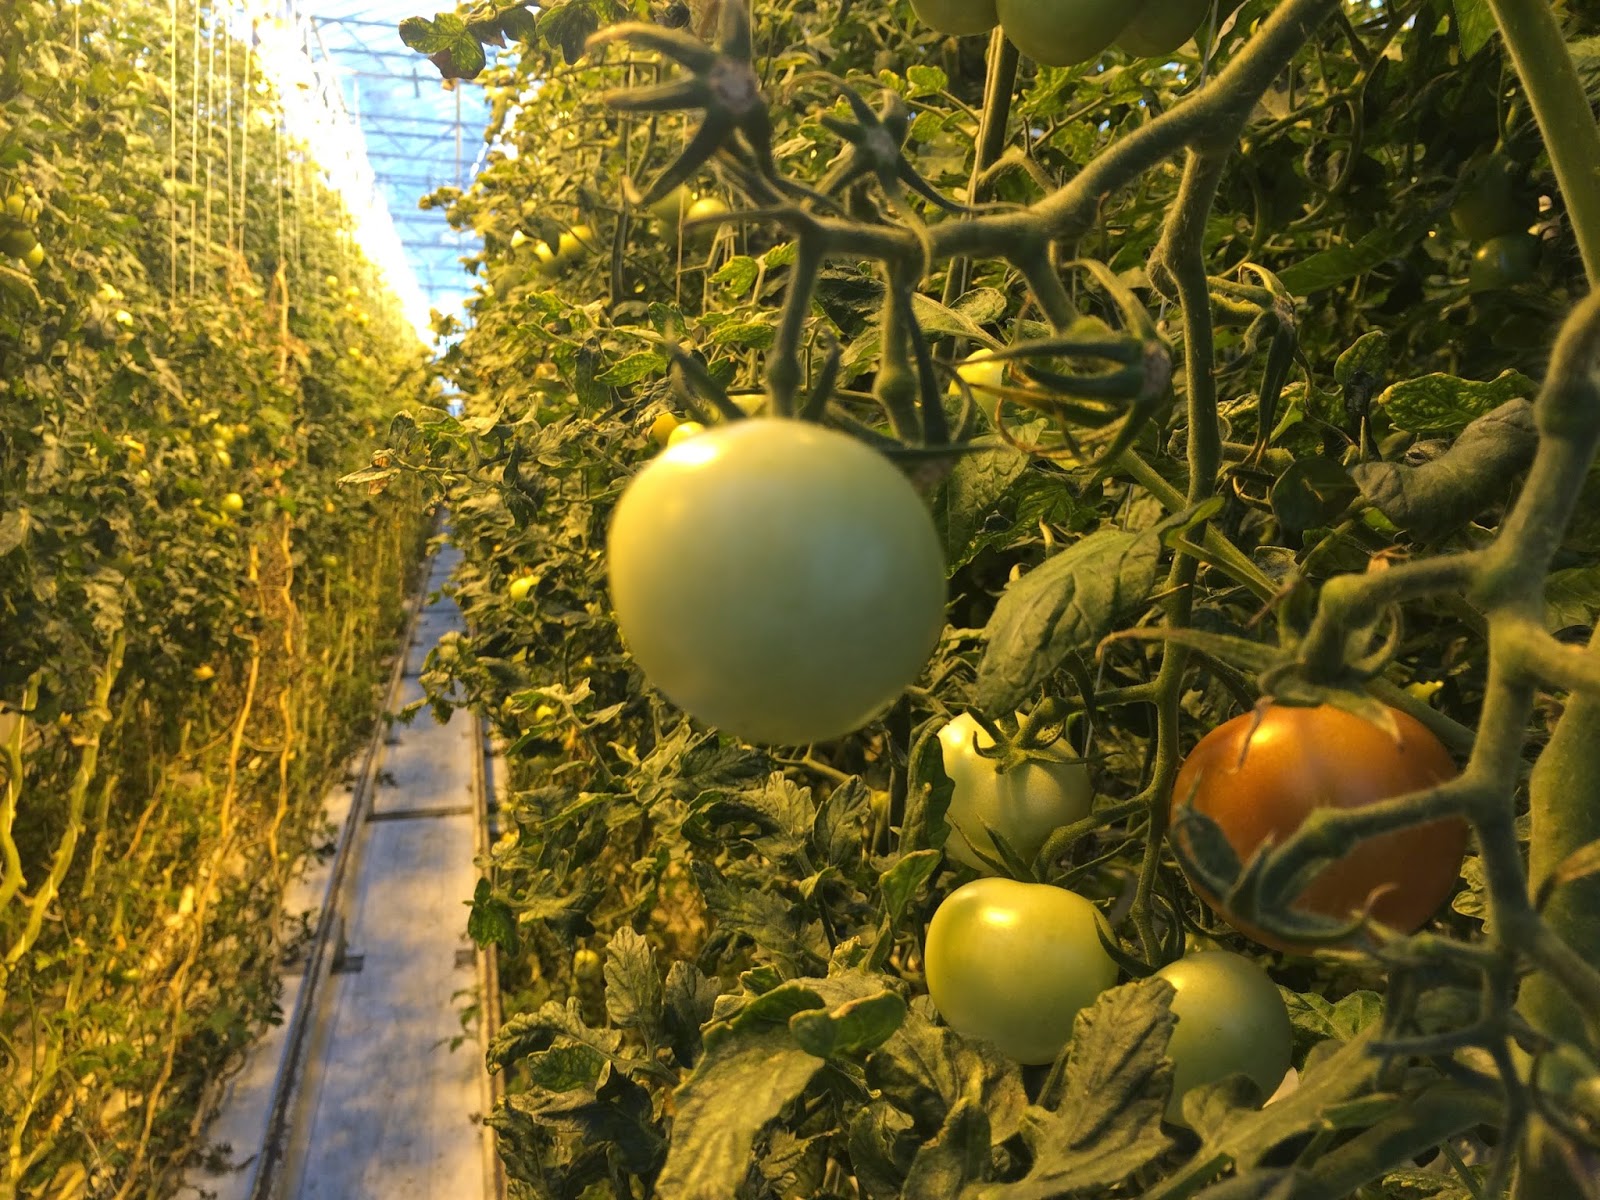 Tomatoes growing at the Fridheimar greenhouse, Iceland